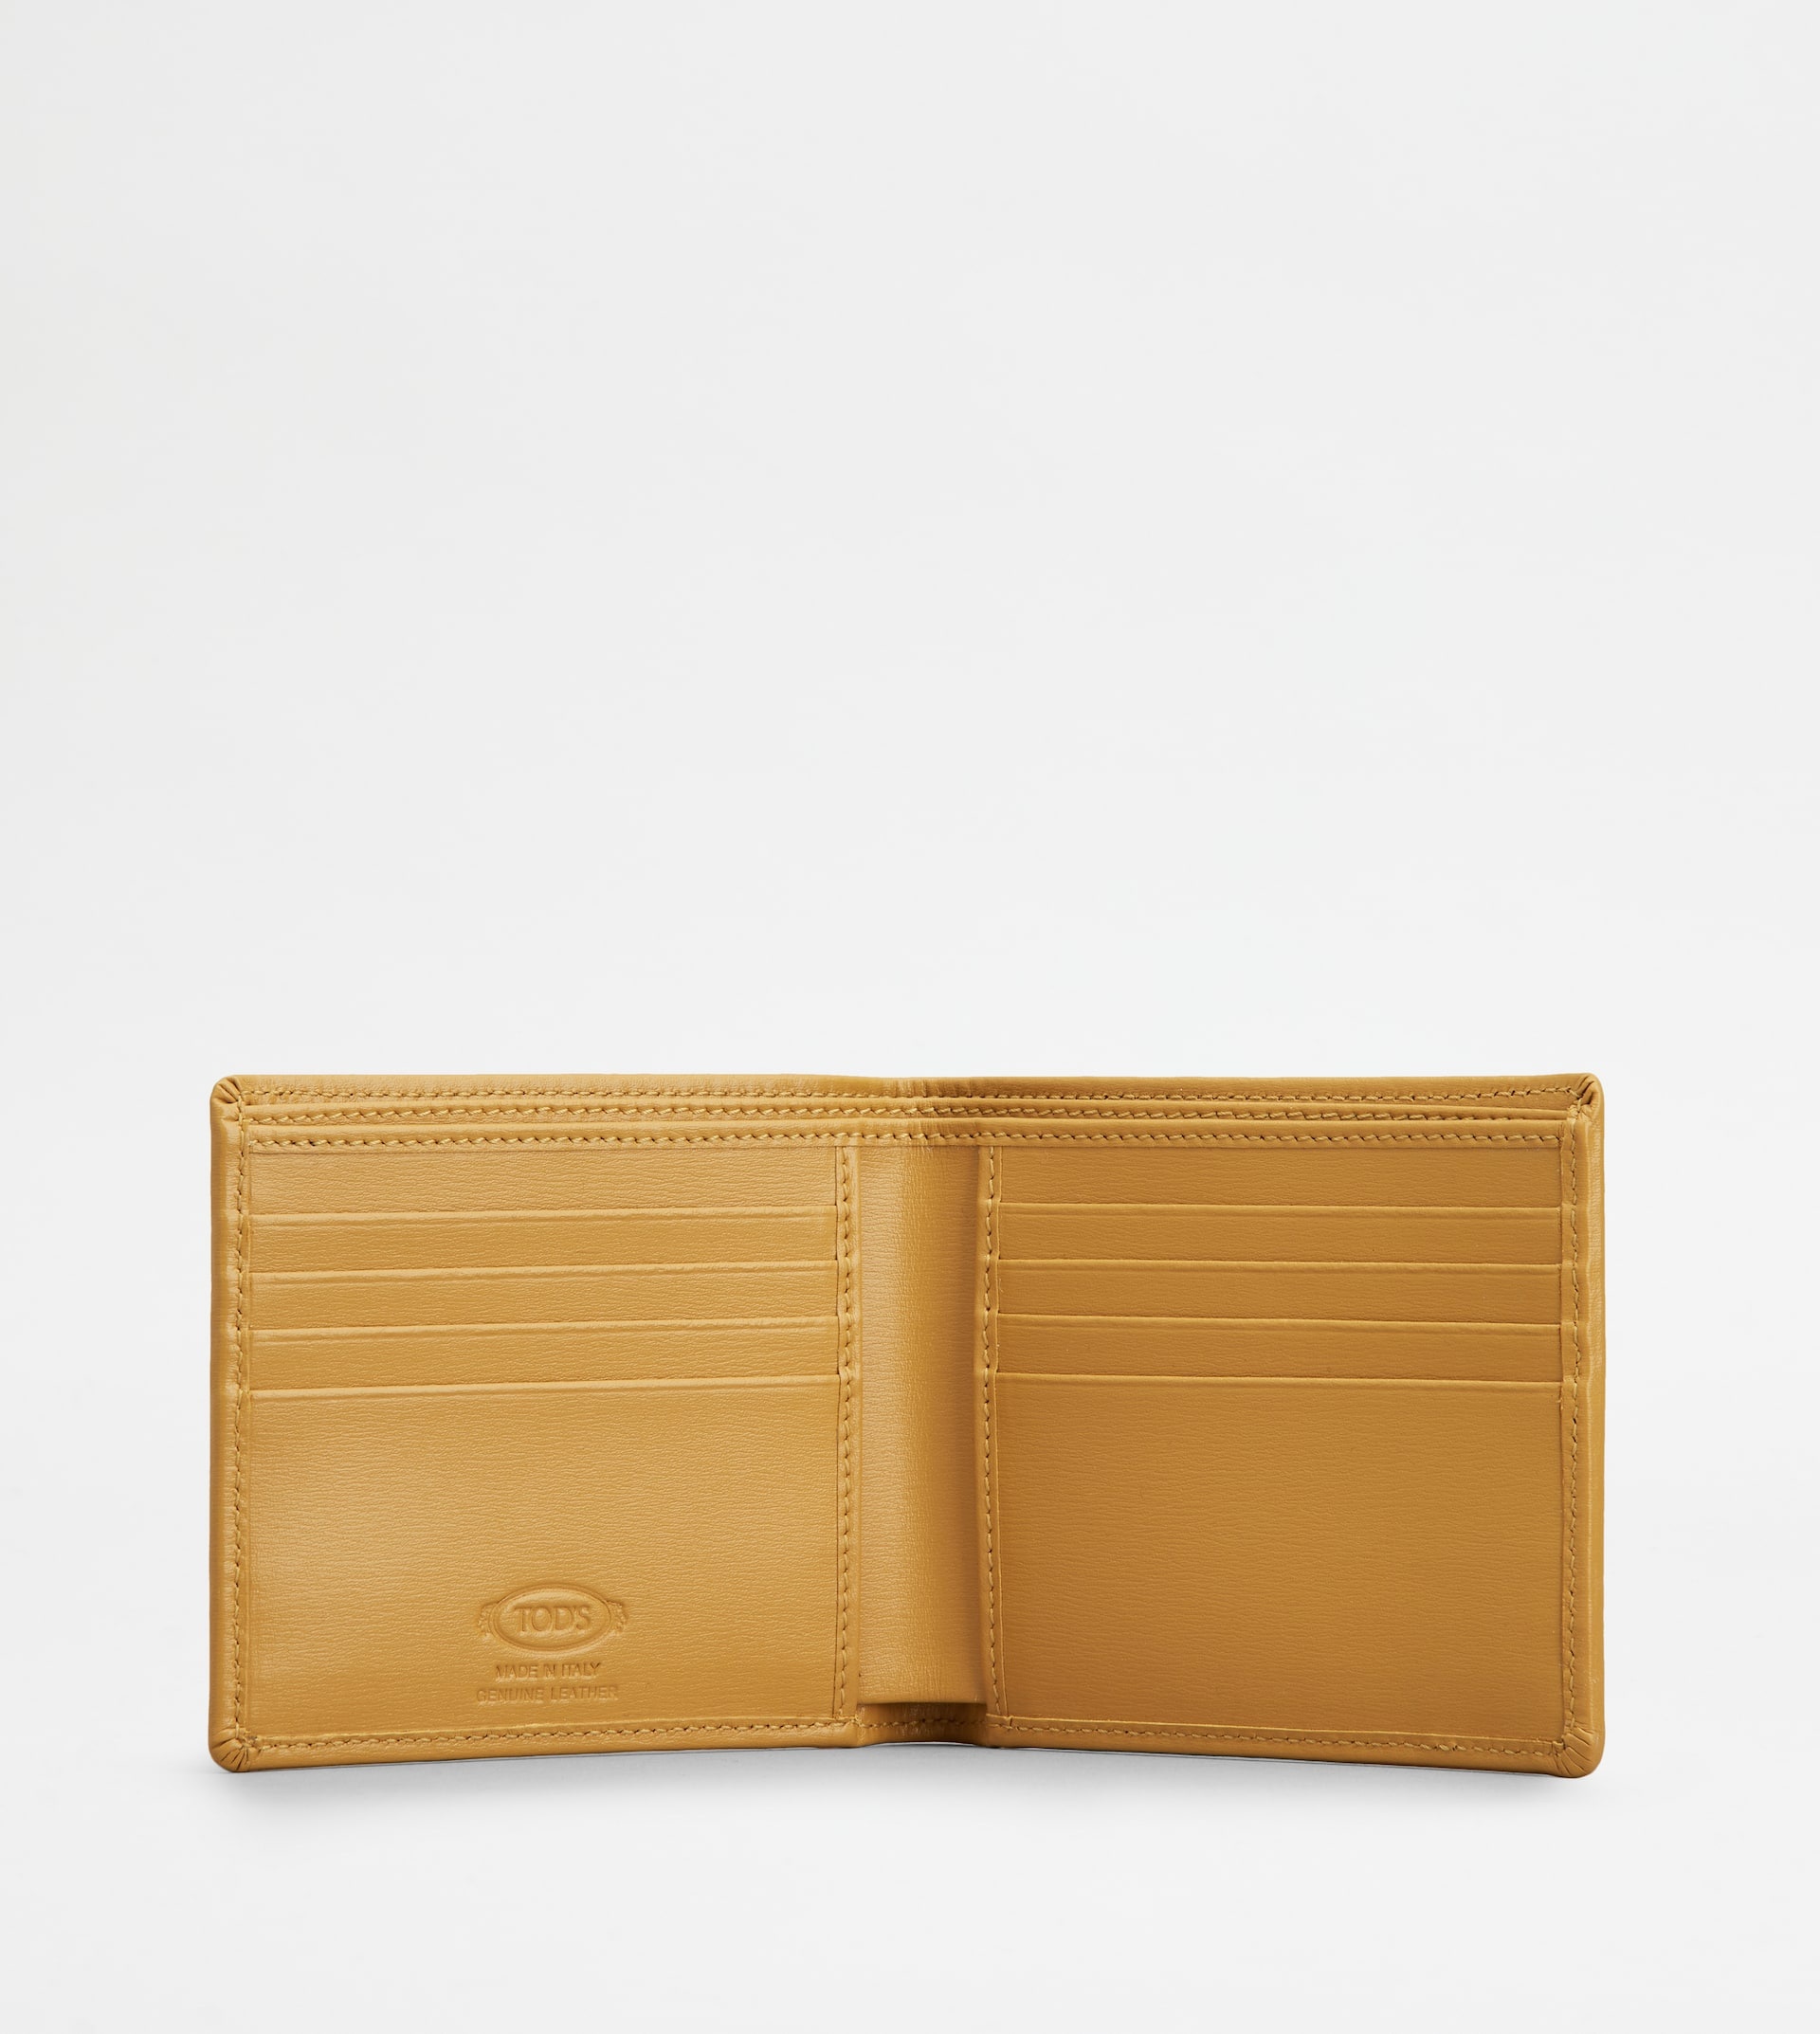 TOD'S WALLET IN LEATHER - YELLOW - 2